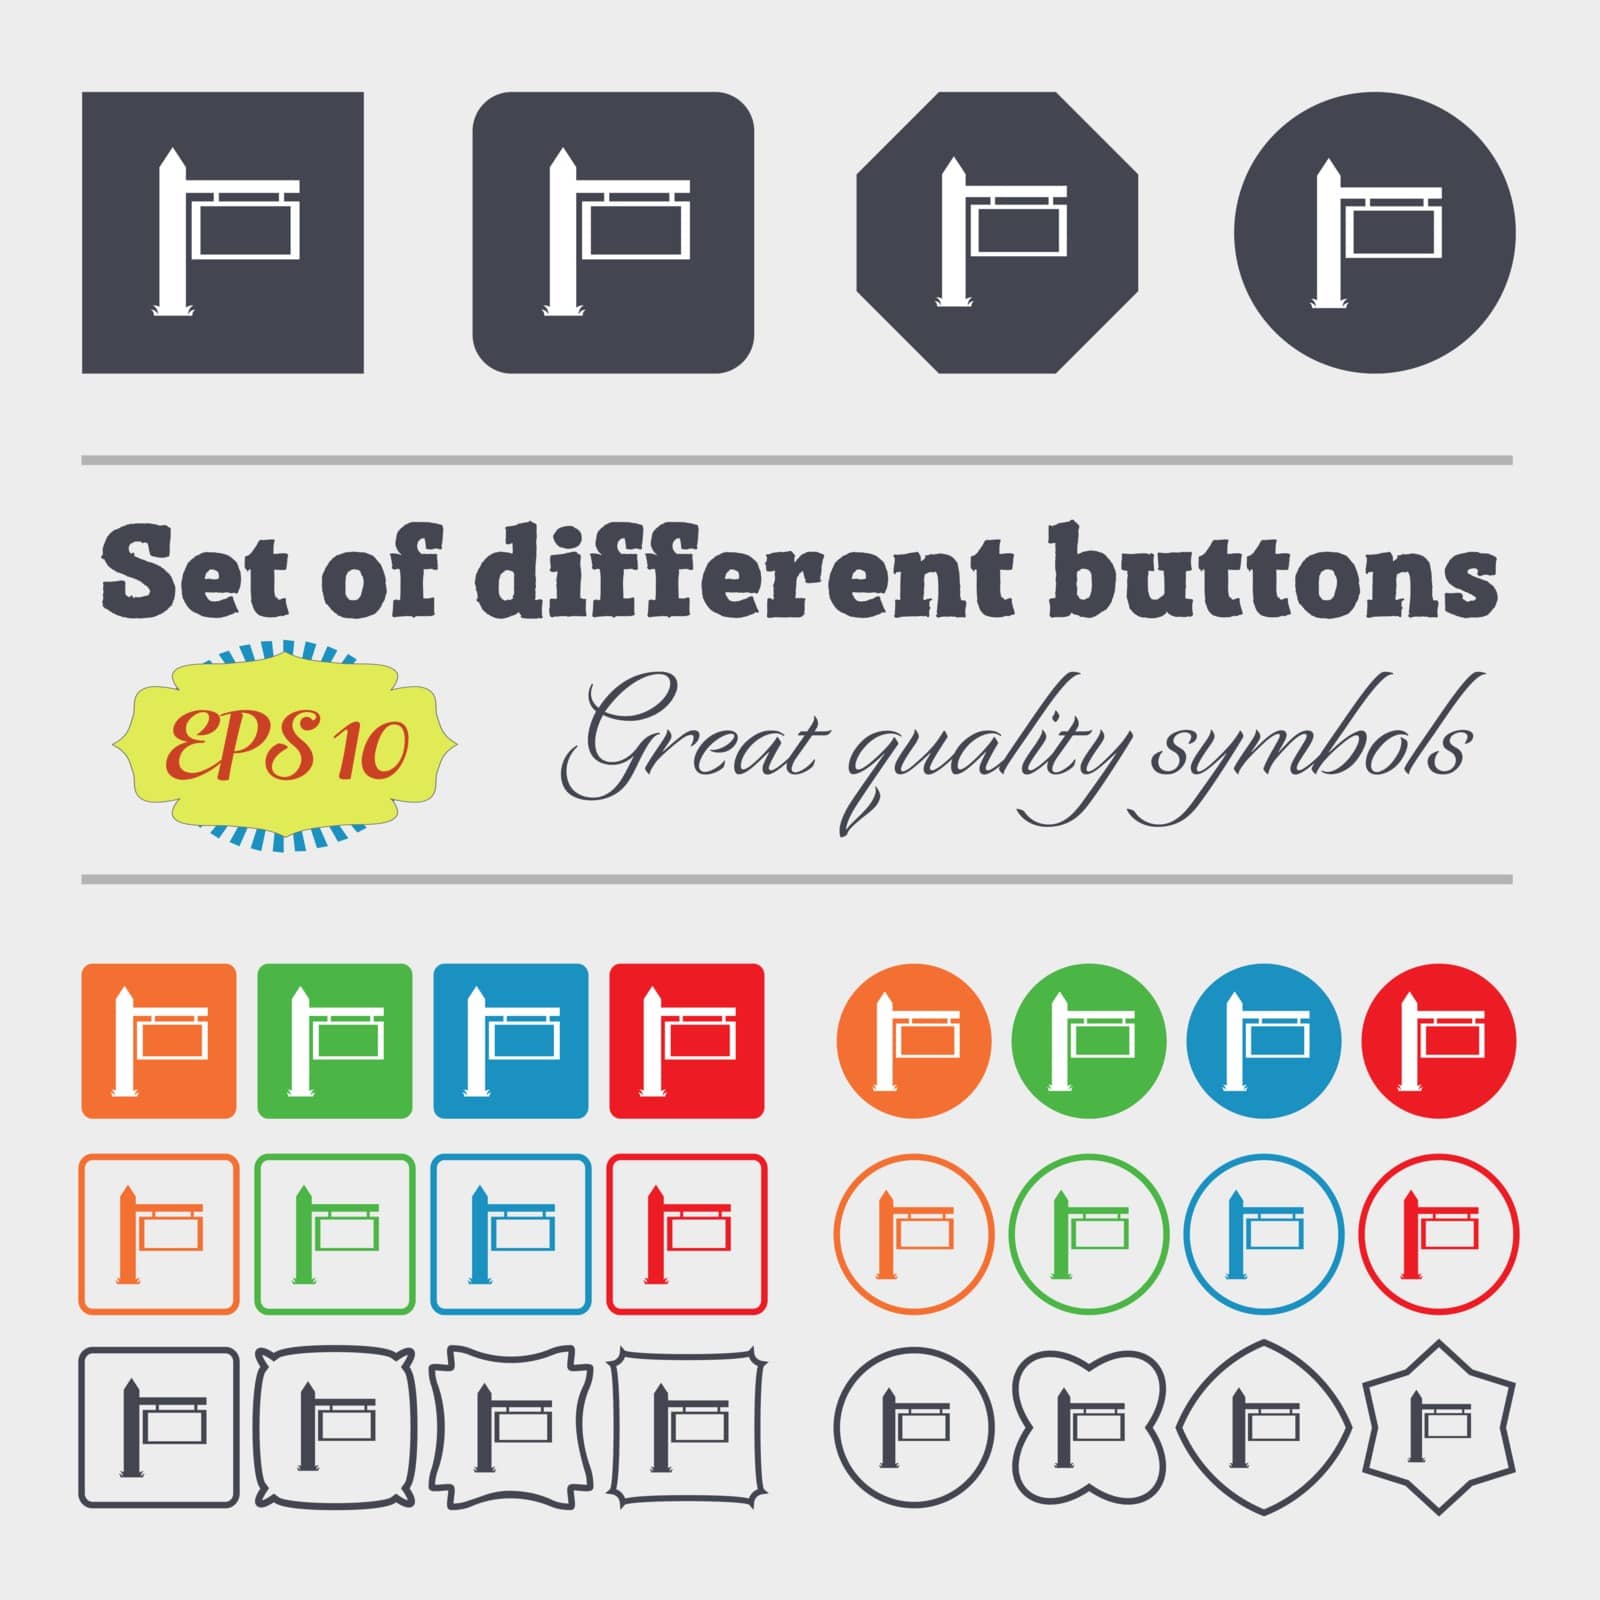 Information Road Sign icon sign. Big set of colorful, diverse, high-quality buttons. Vector illustration